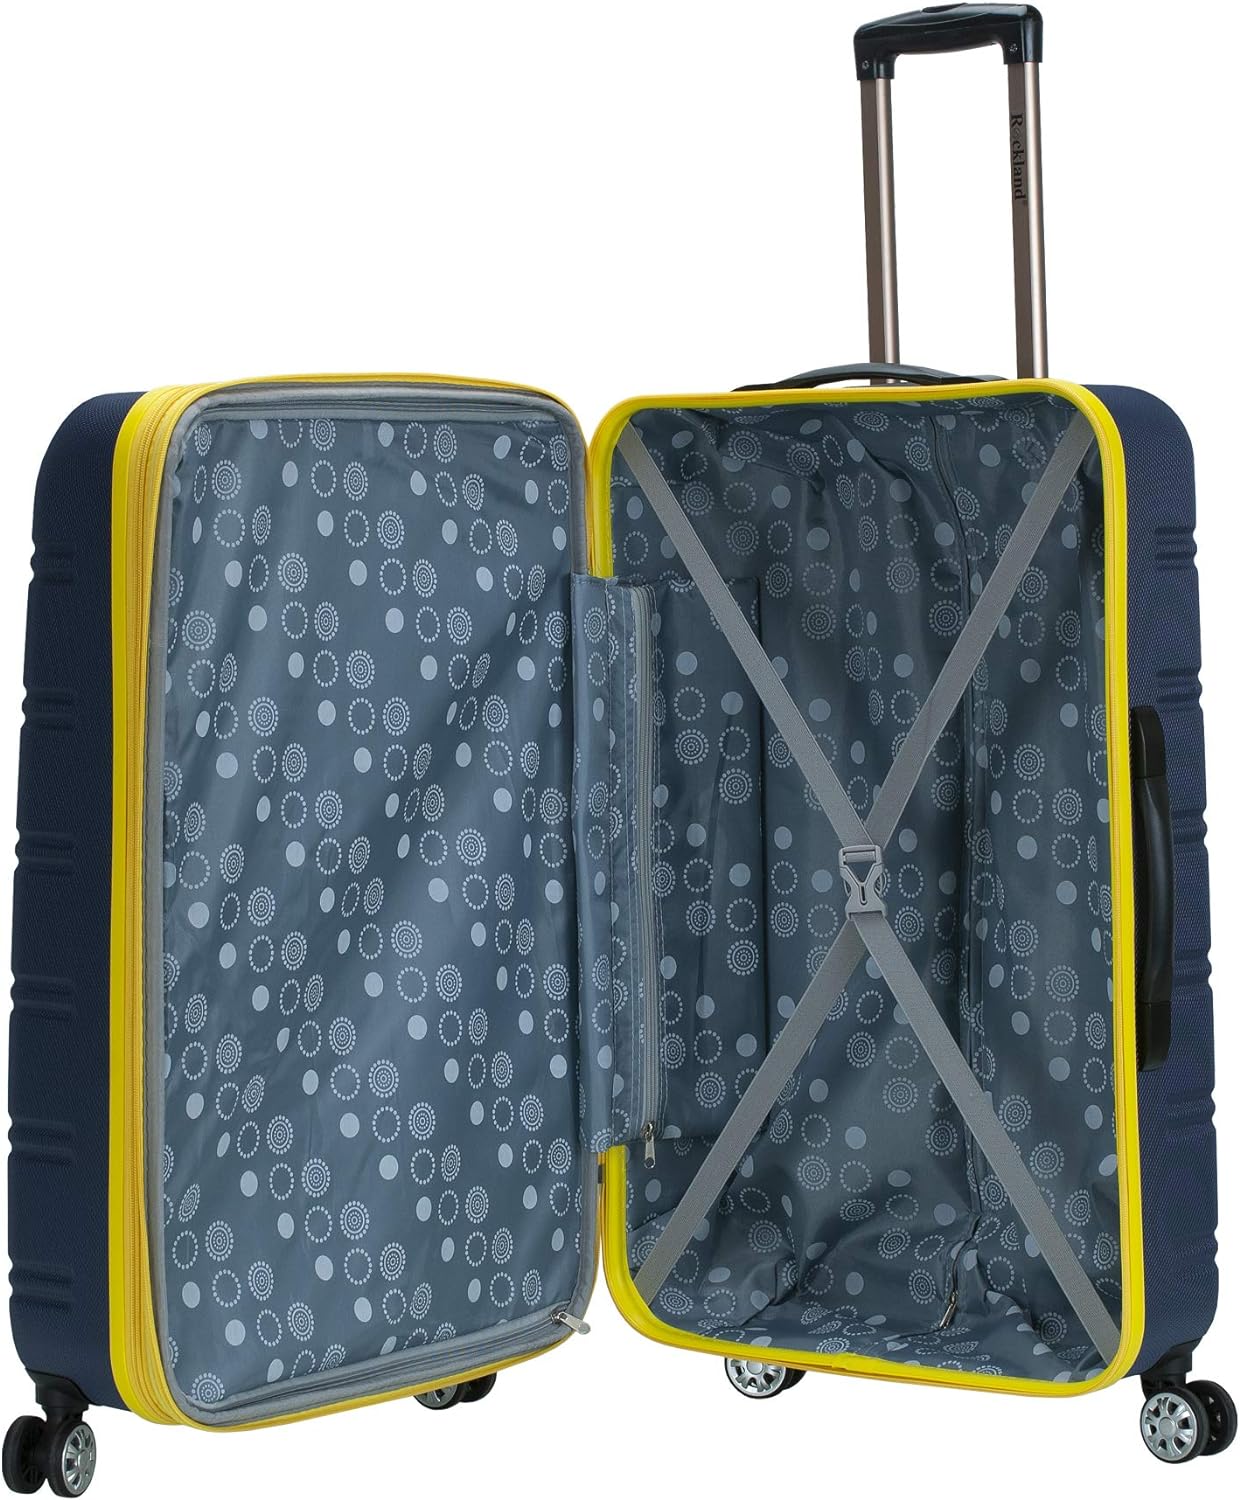 ROCKLAND Melbourne 3 Pc Abs Luggage Set - Navy